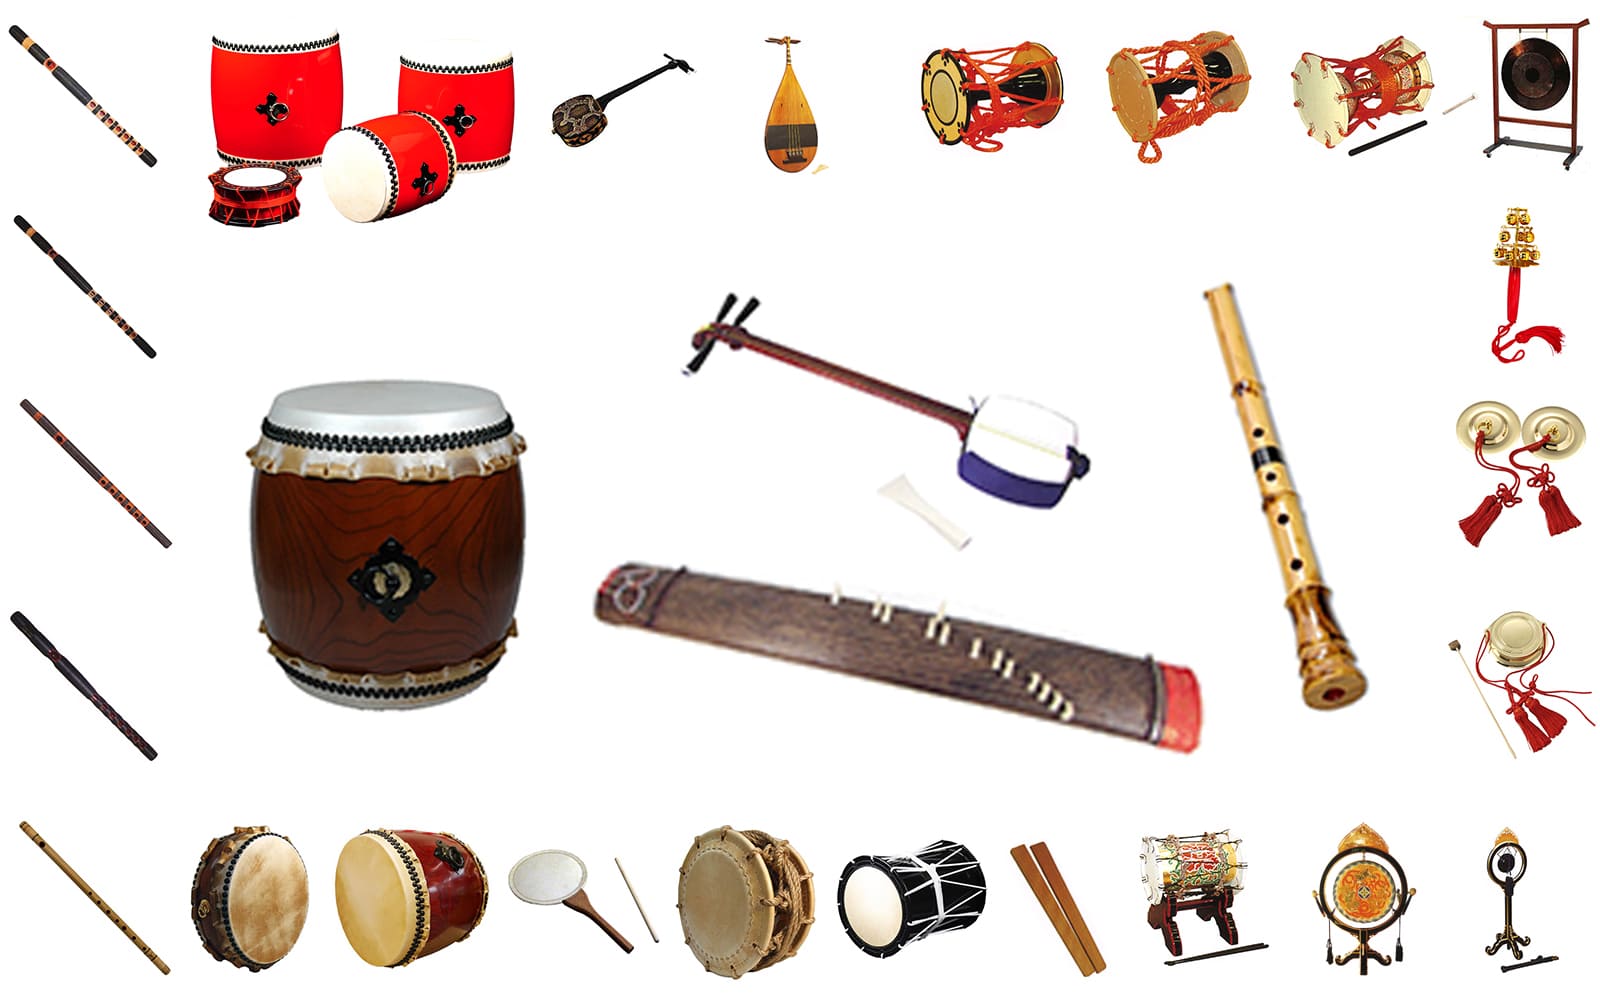 Additional Instruments